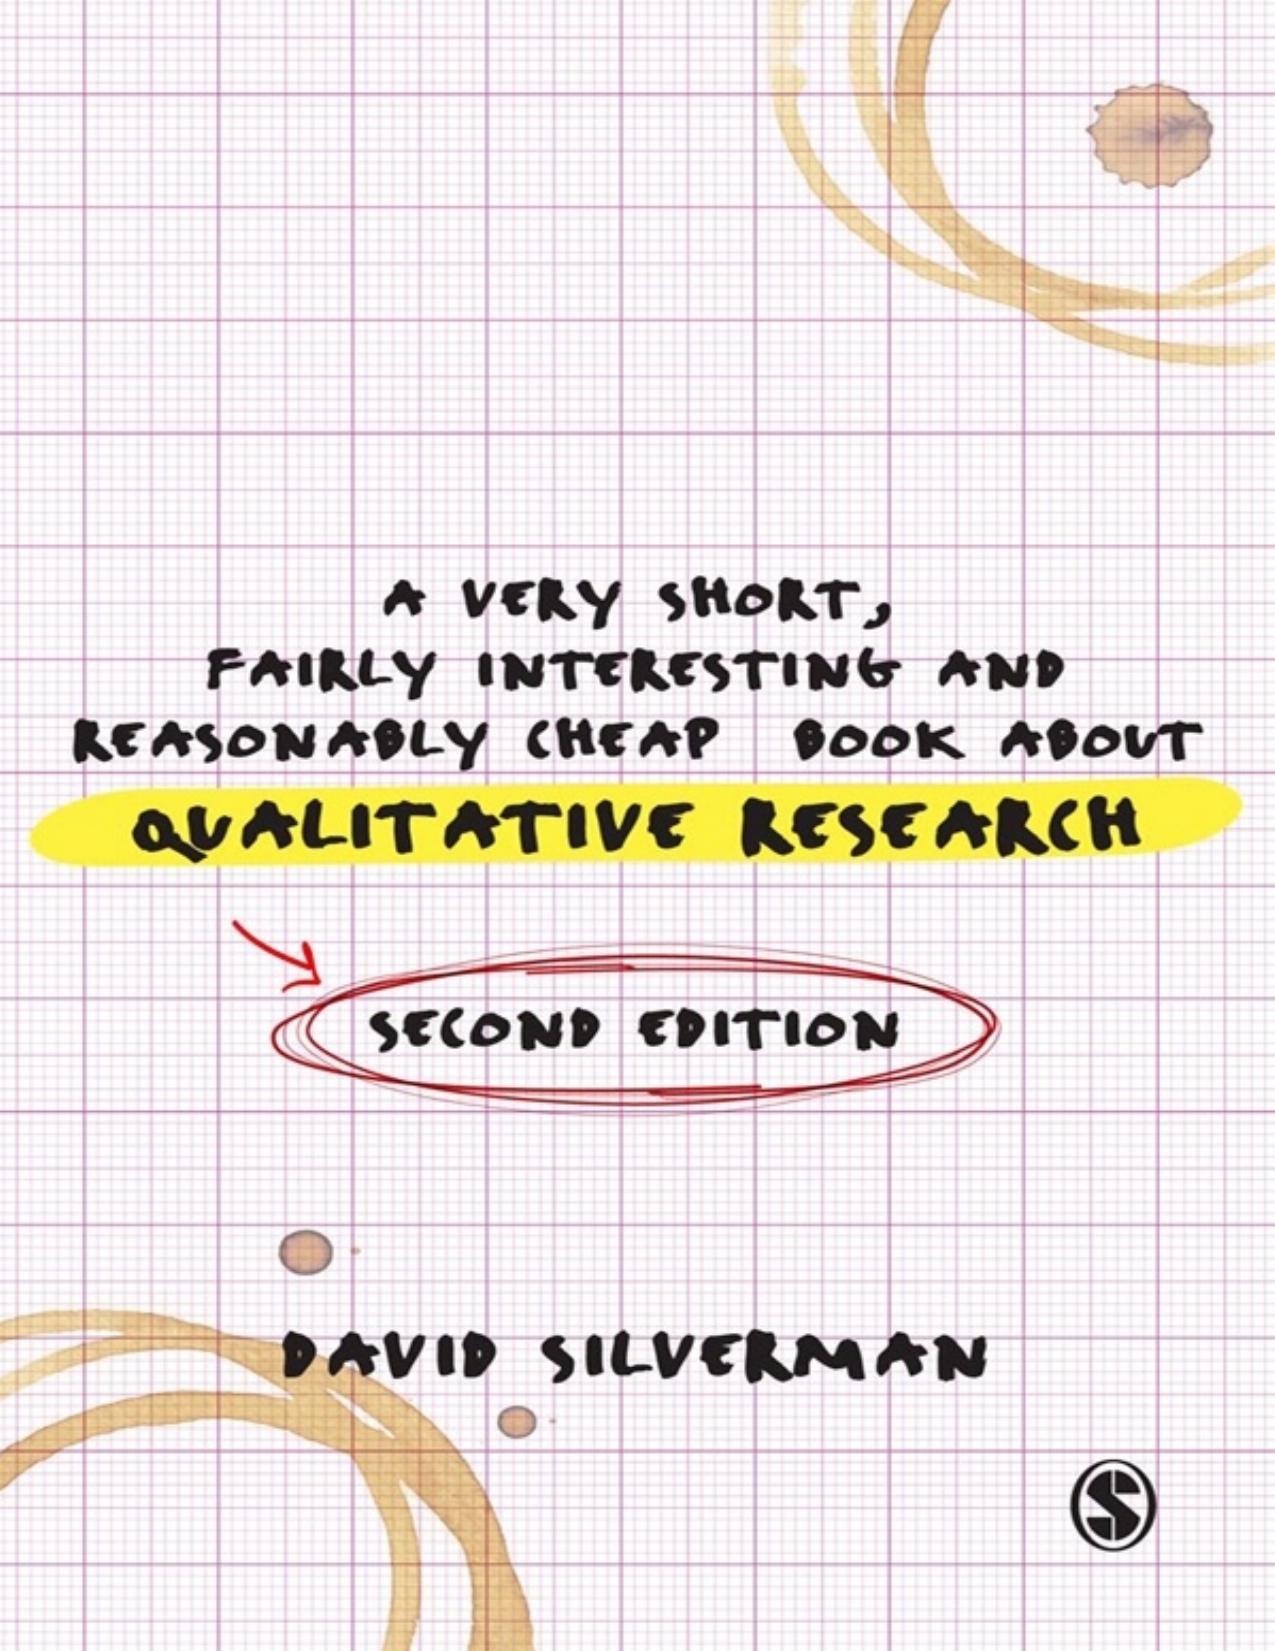 Very Short, Fairly Interesting and Reasonably Cheap Book about Management 2e, A - David Silverman.jpg